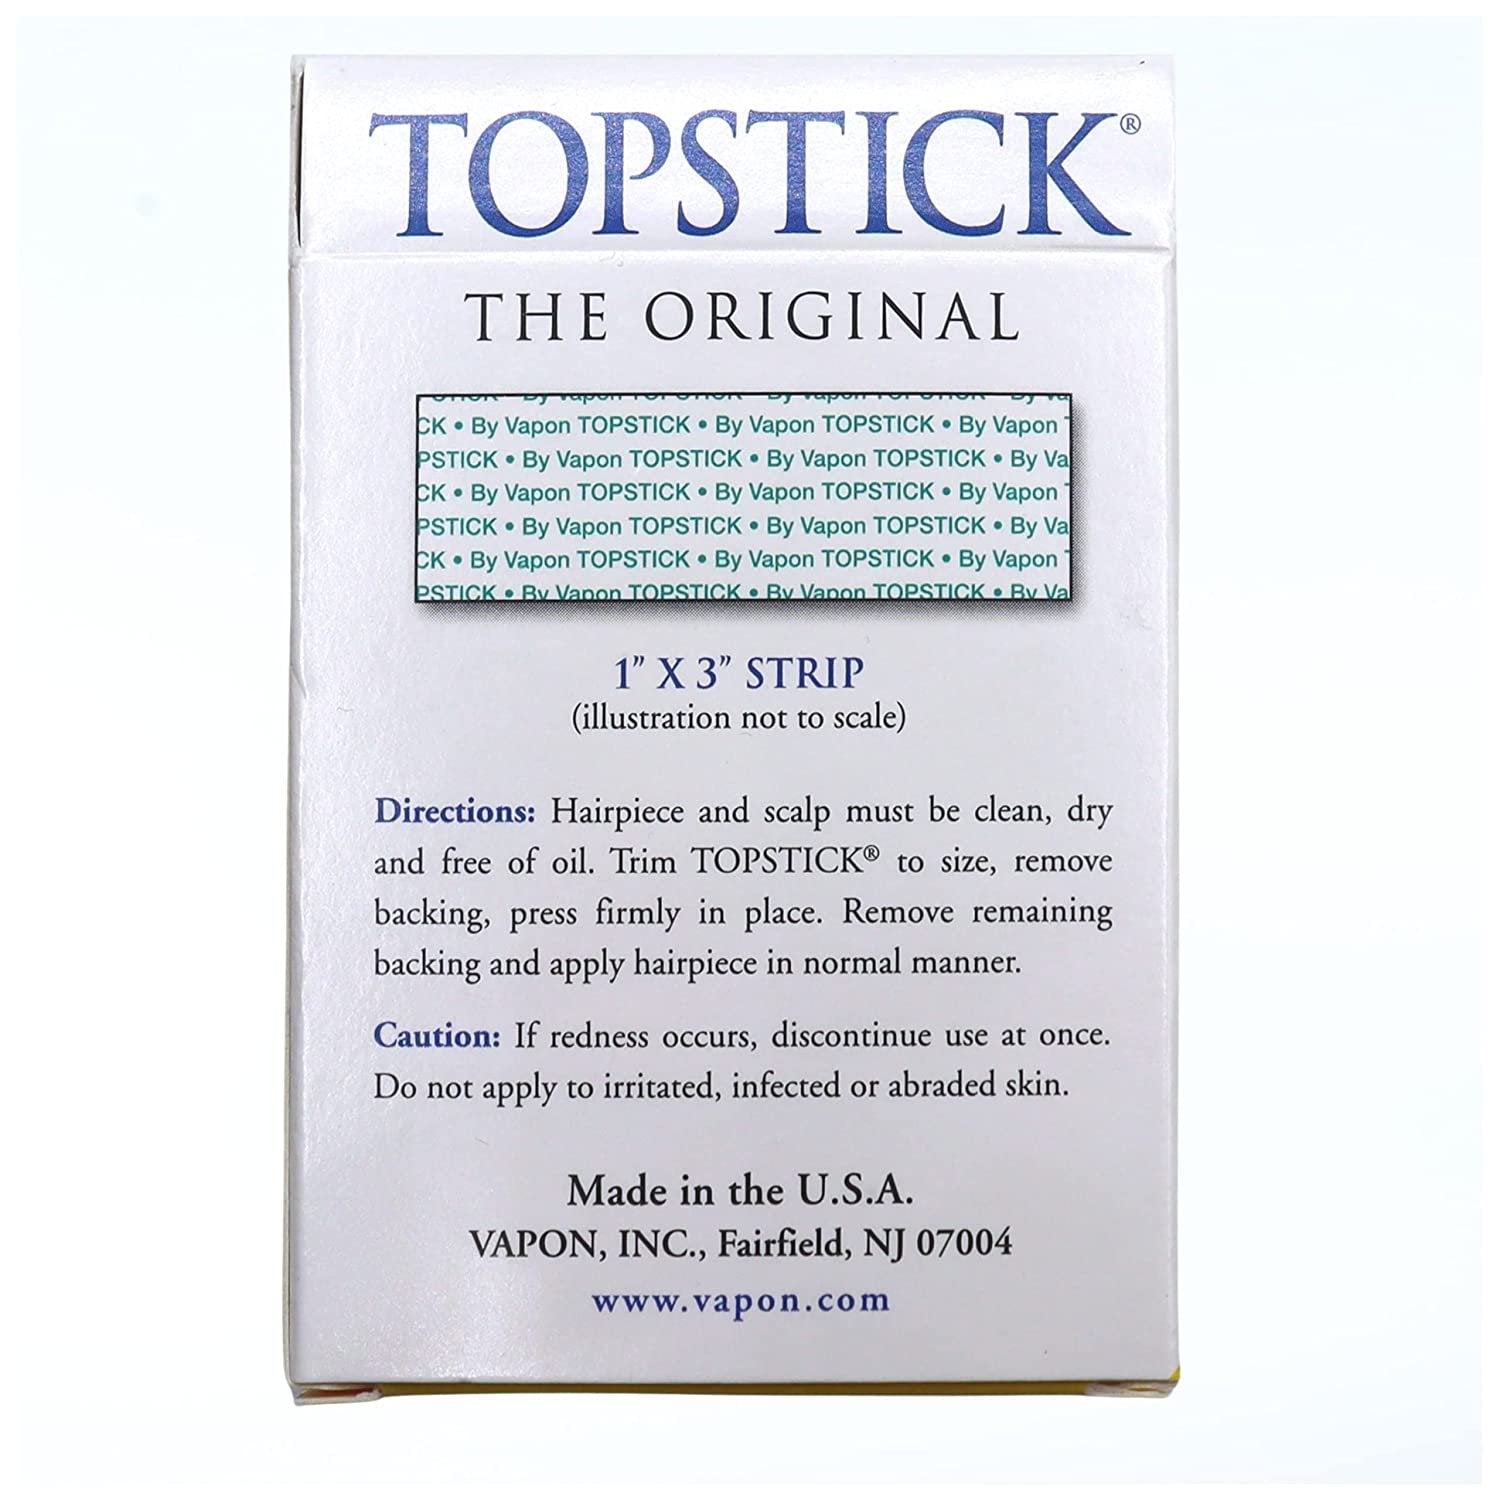 Vapon Topstick - The Original Men's Grooming Tape - 50 Count 1" x 3" Double Sided, Self Adhesive, Clear Tape for Toupee and Wig Adhesion - Hypo Allergenic, Waterproof, and Latex Free